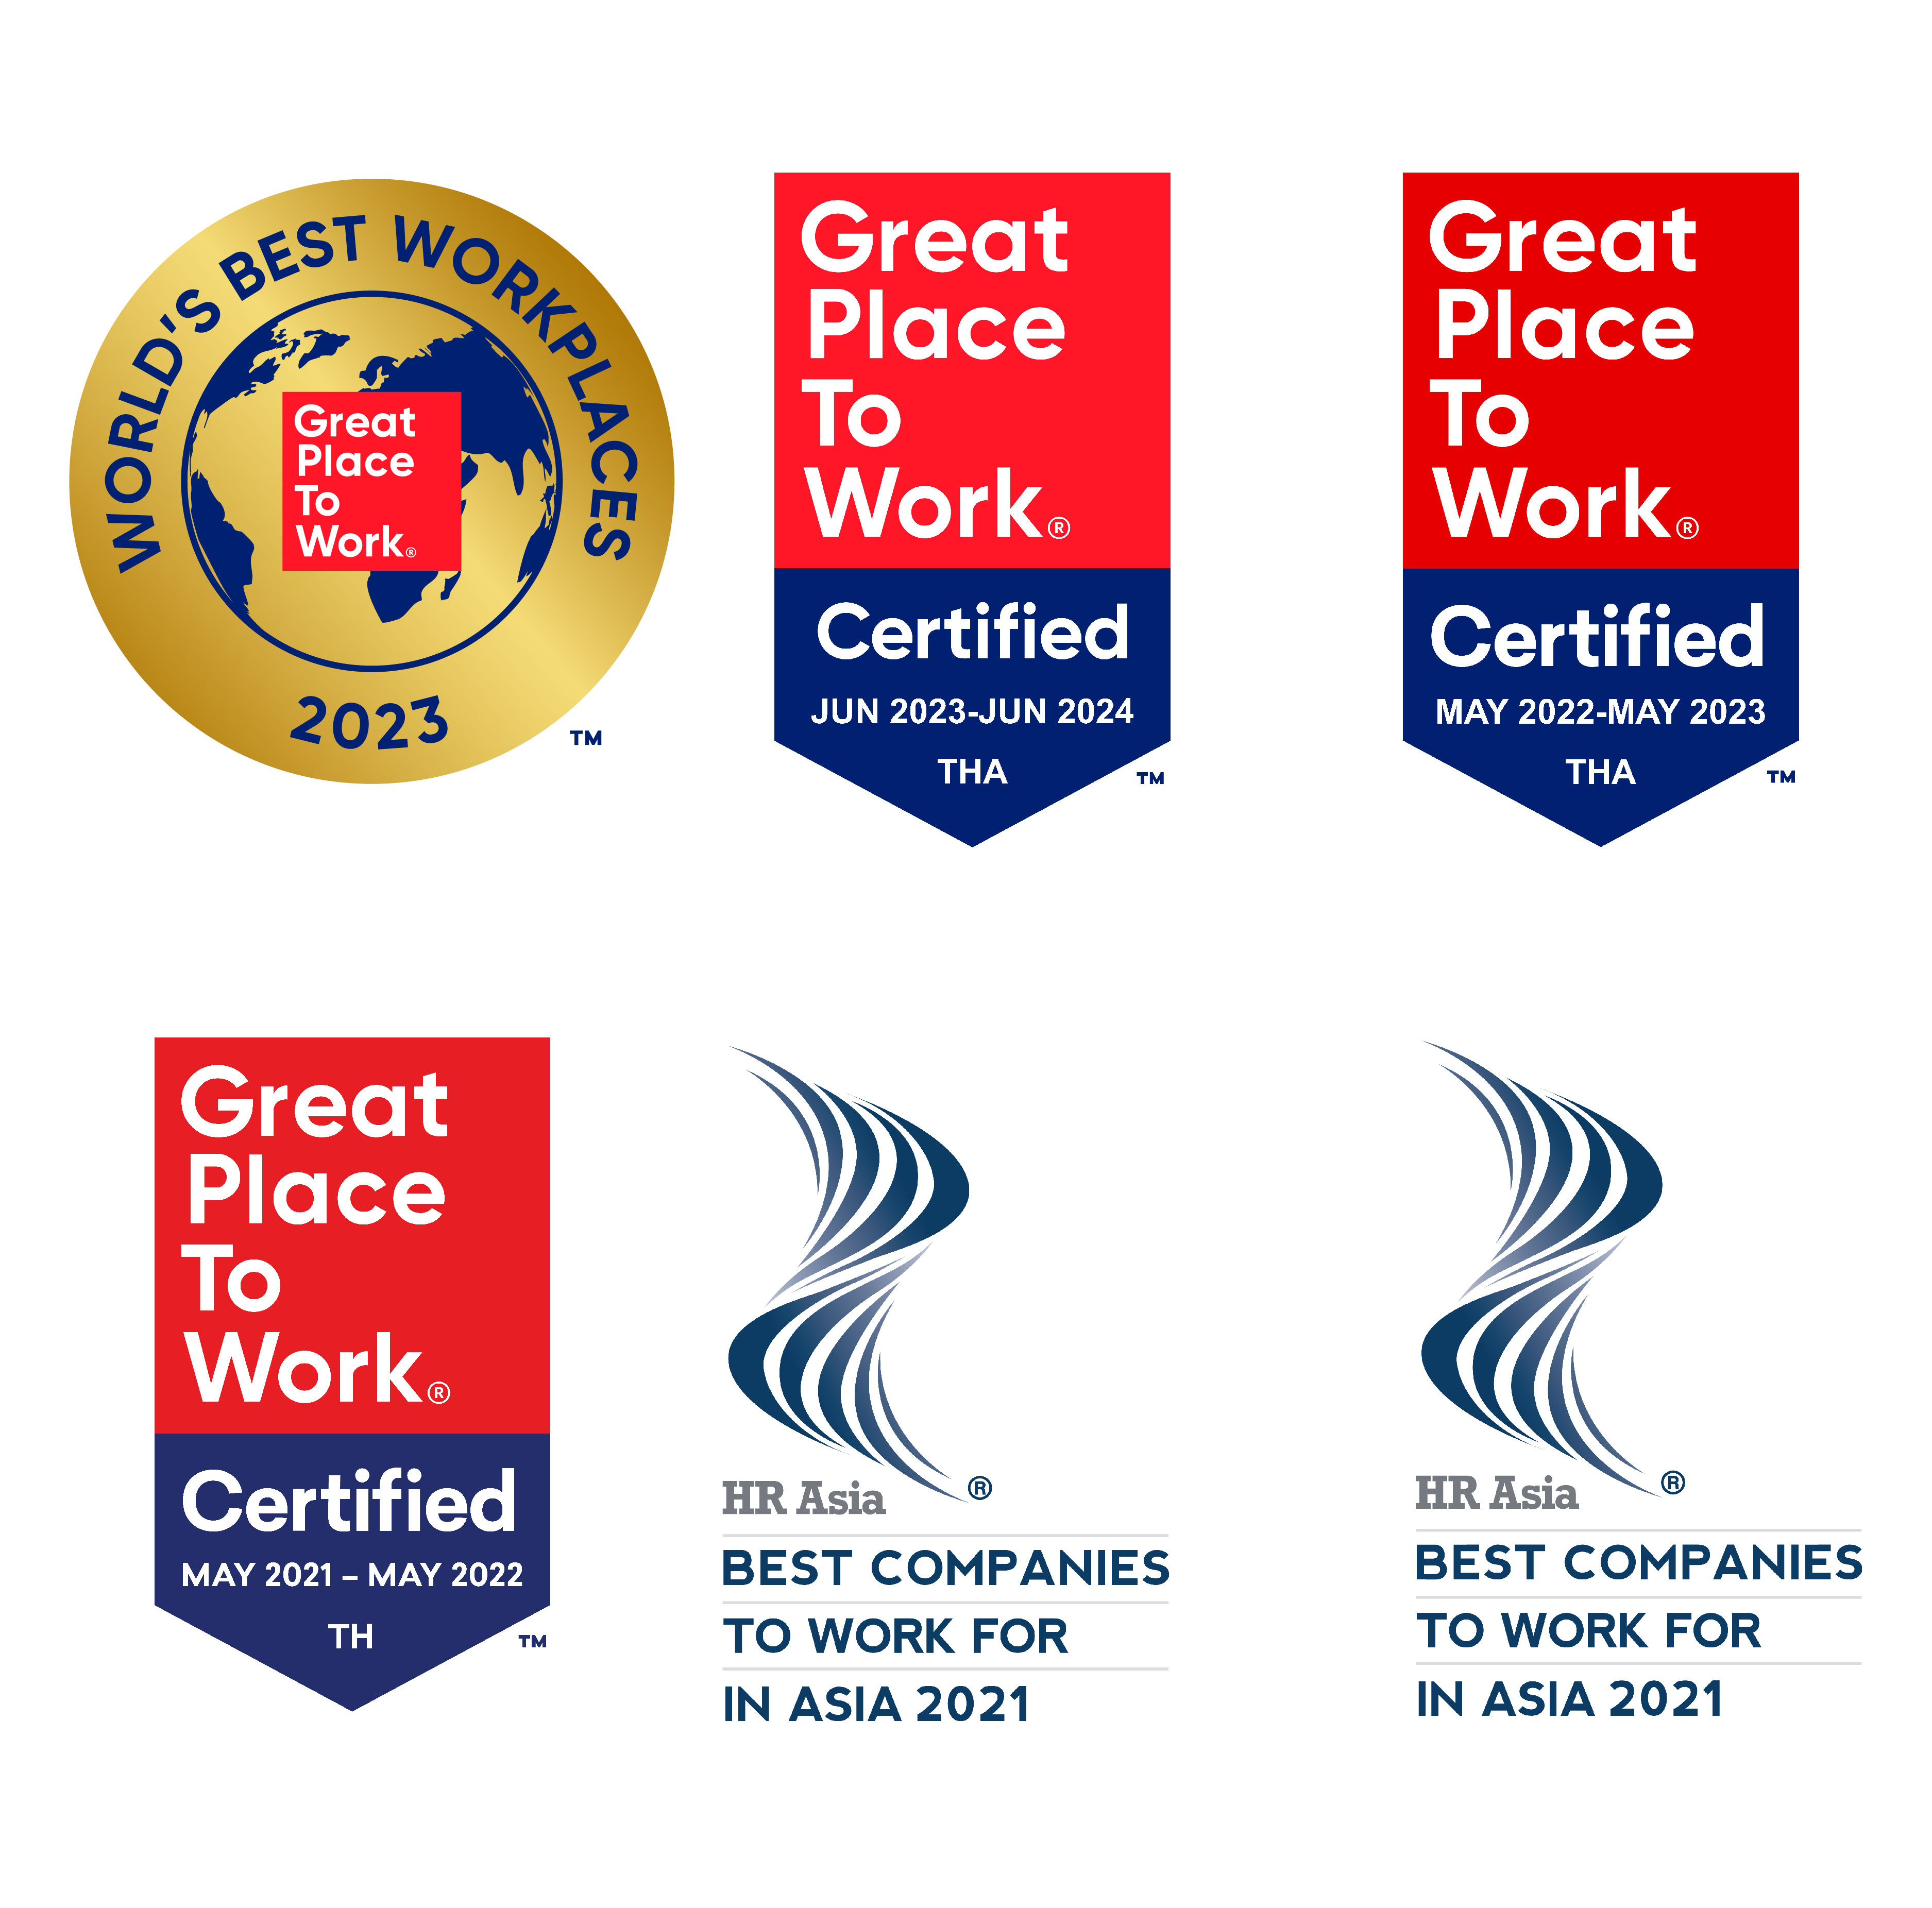 A variety of logos showing that Thoughtworks has been certified as a Great Place to Work in Thailand